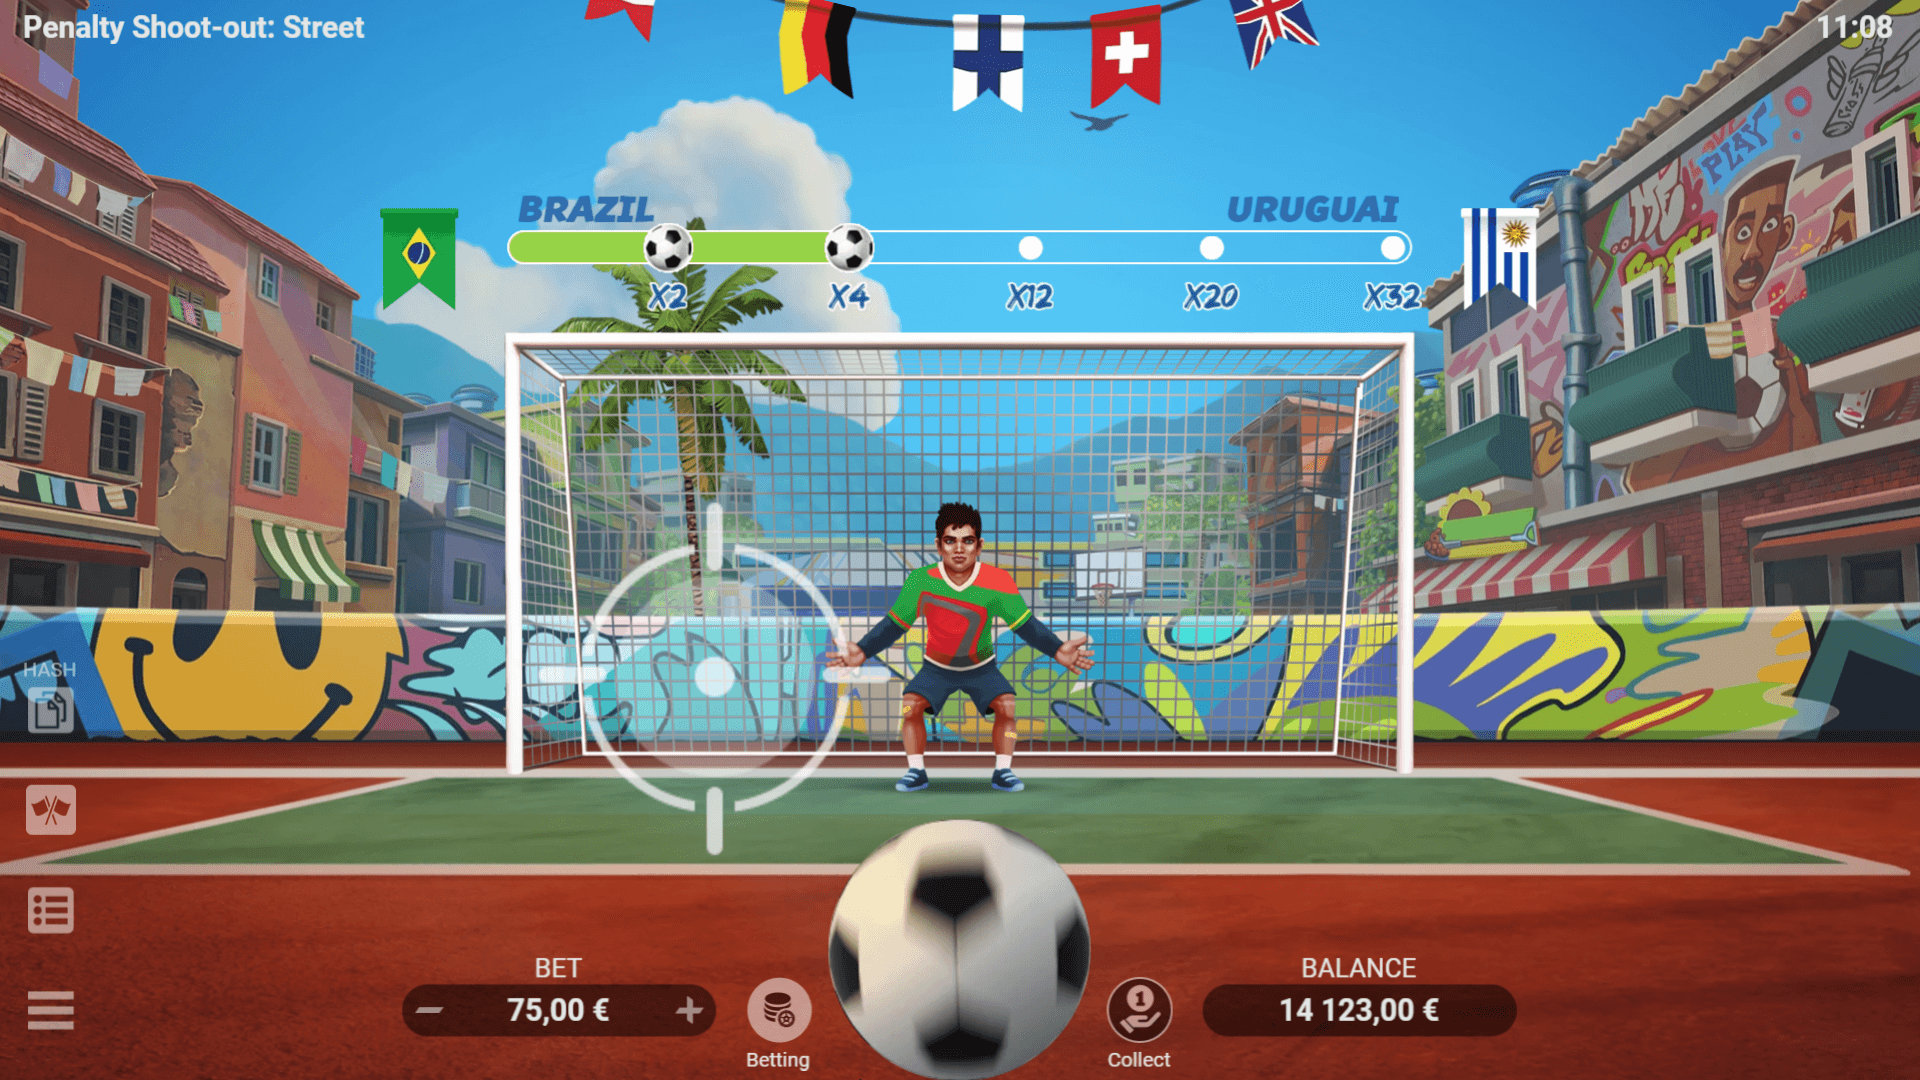 PENALTY SHOOT-OUT STREET Evoplay slotxo download